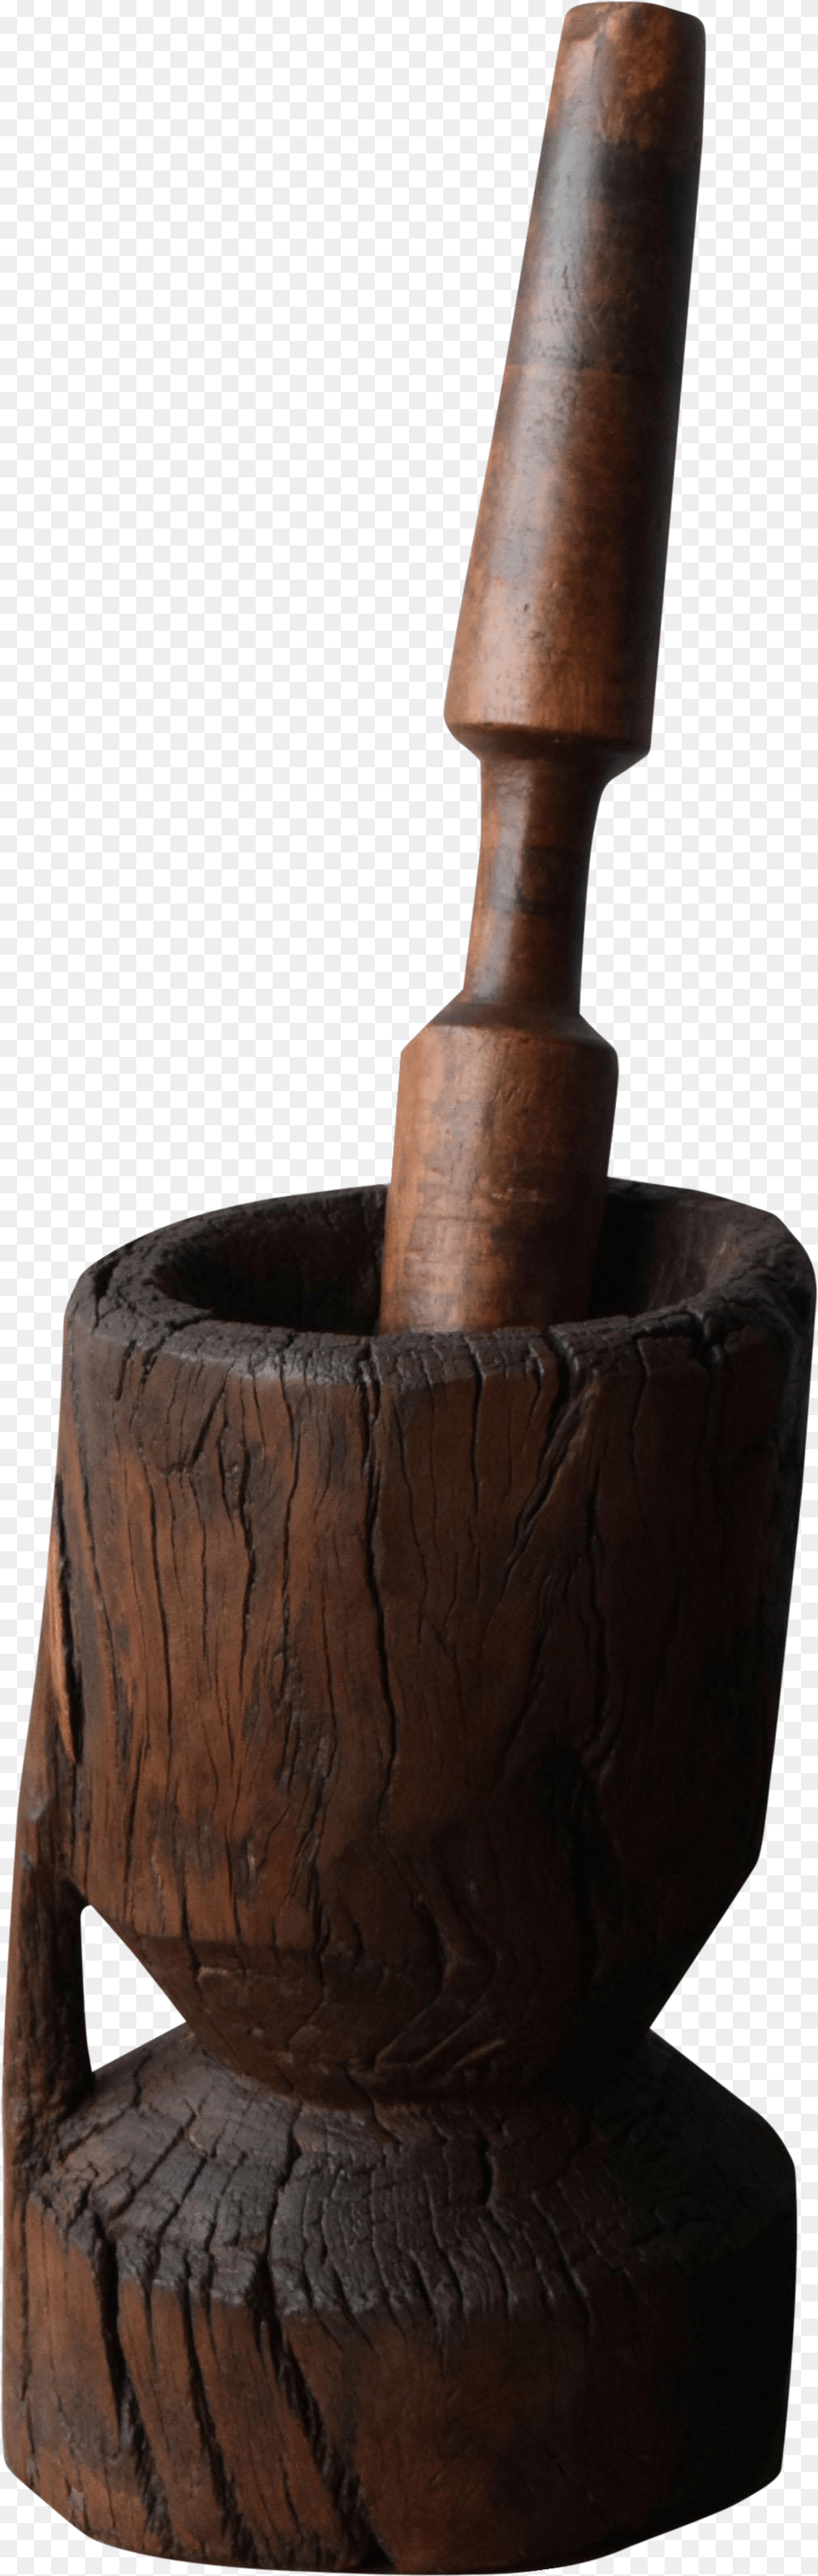 Antique Wood Small Mortar Amp Pestle Set On Chairish Chair, Cannon, Weapon, Smoke Pipe Free Png Download